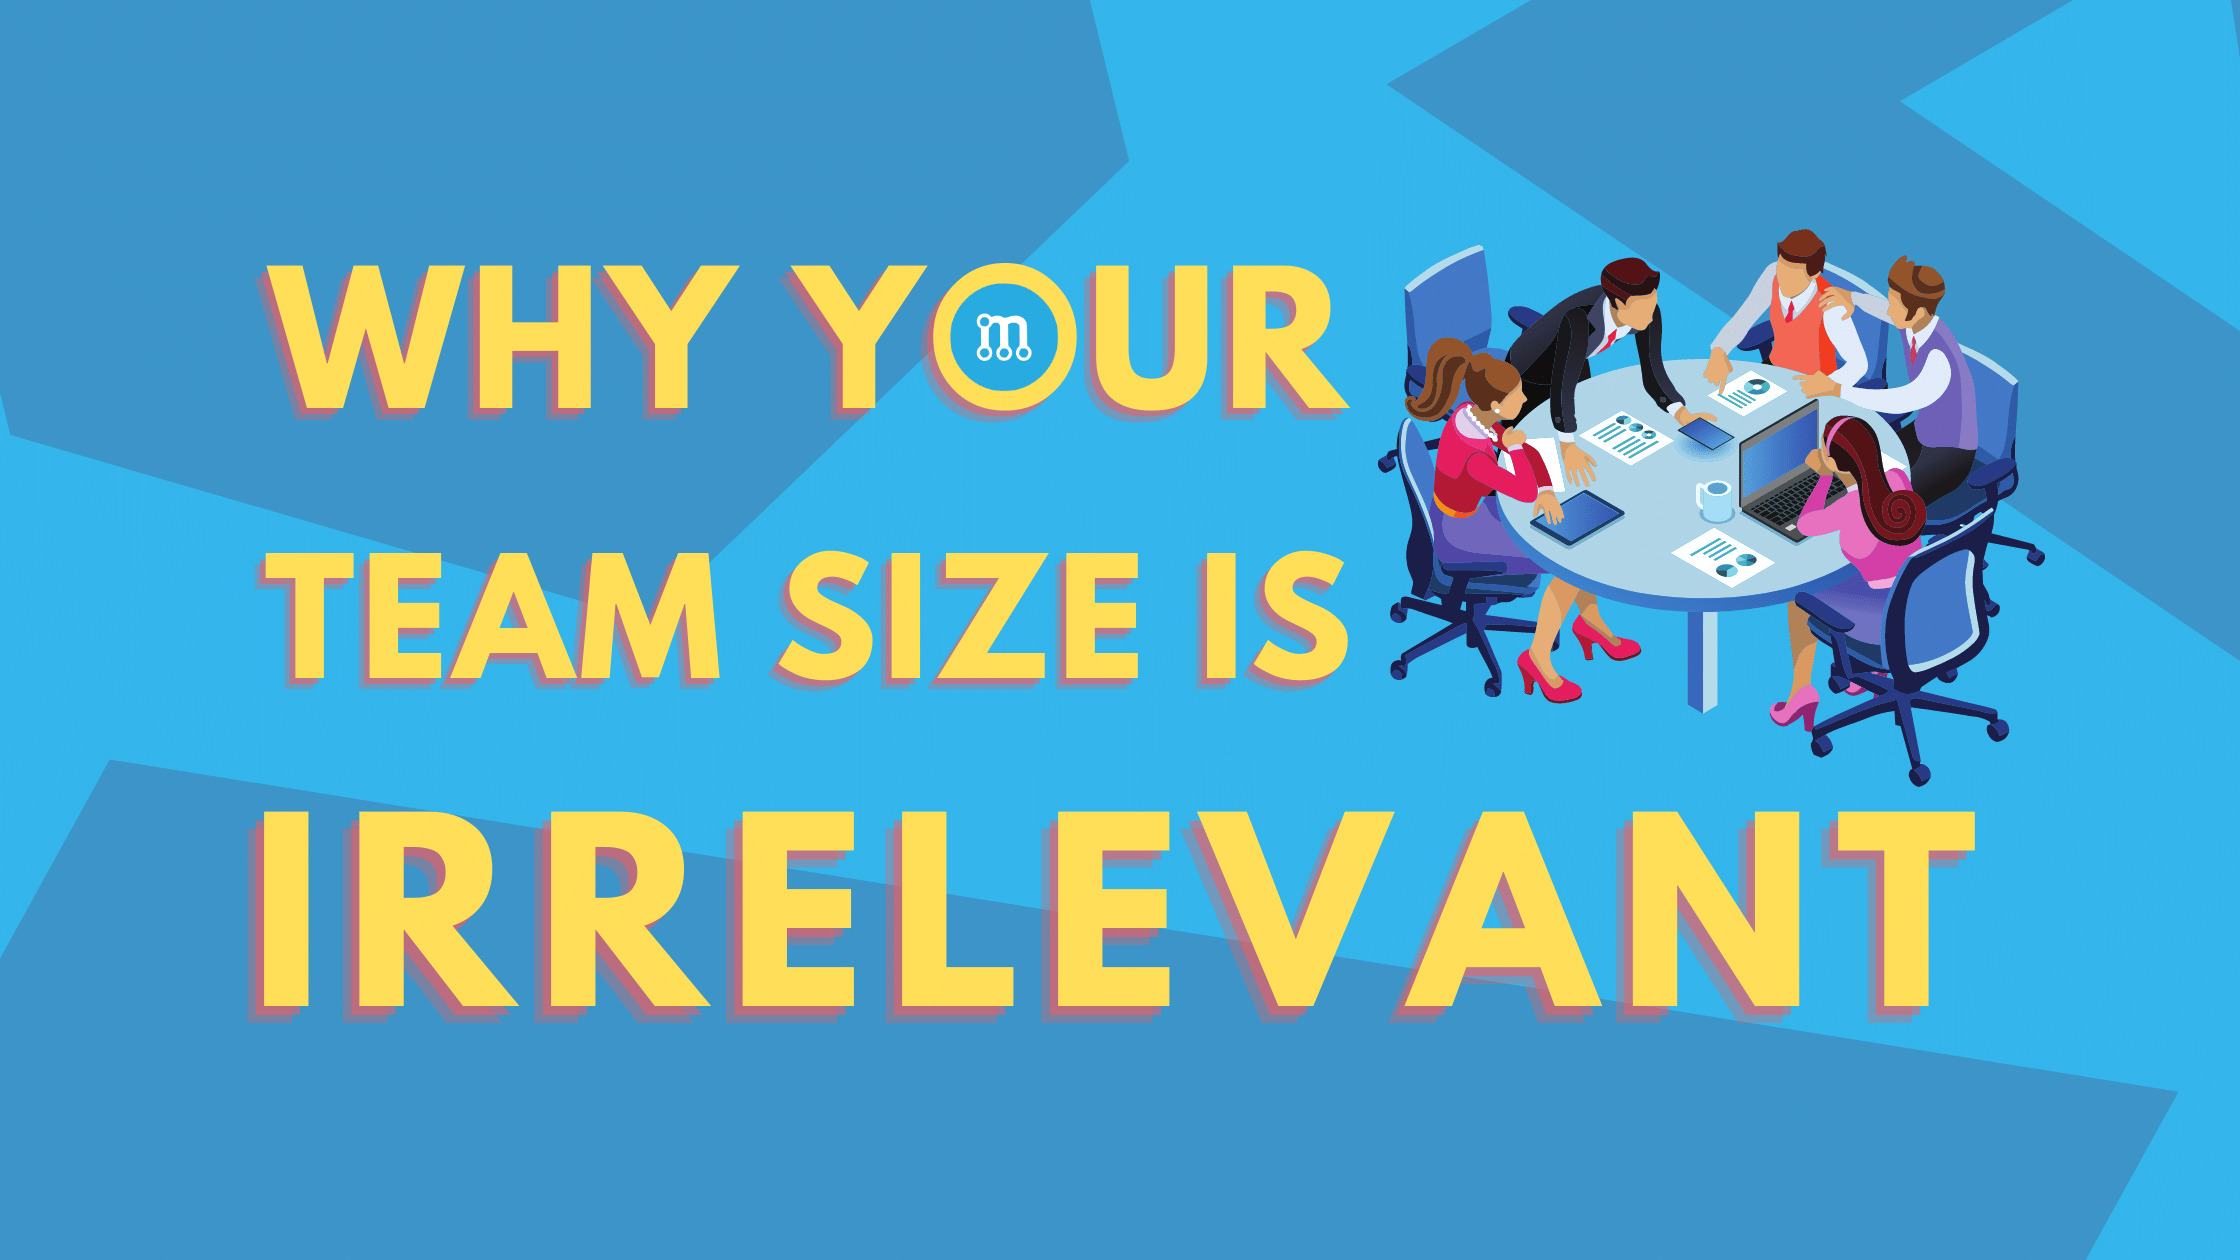 Why your team size is irrelevant